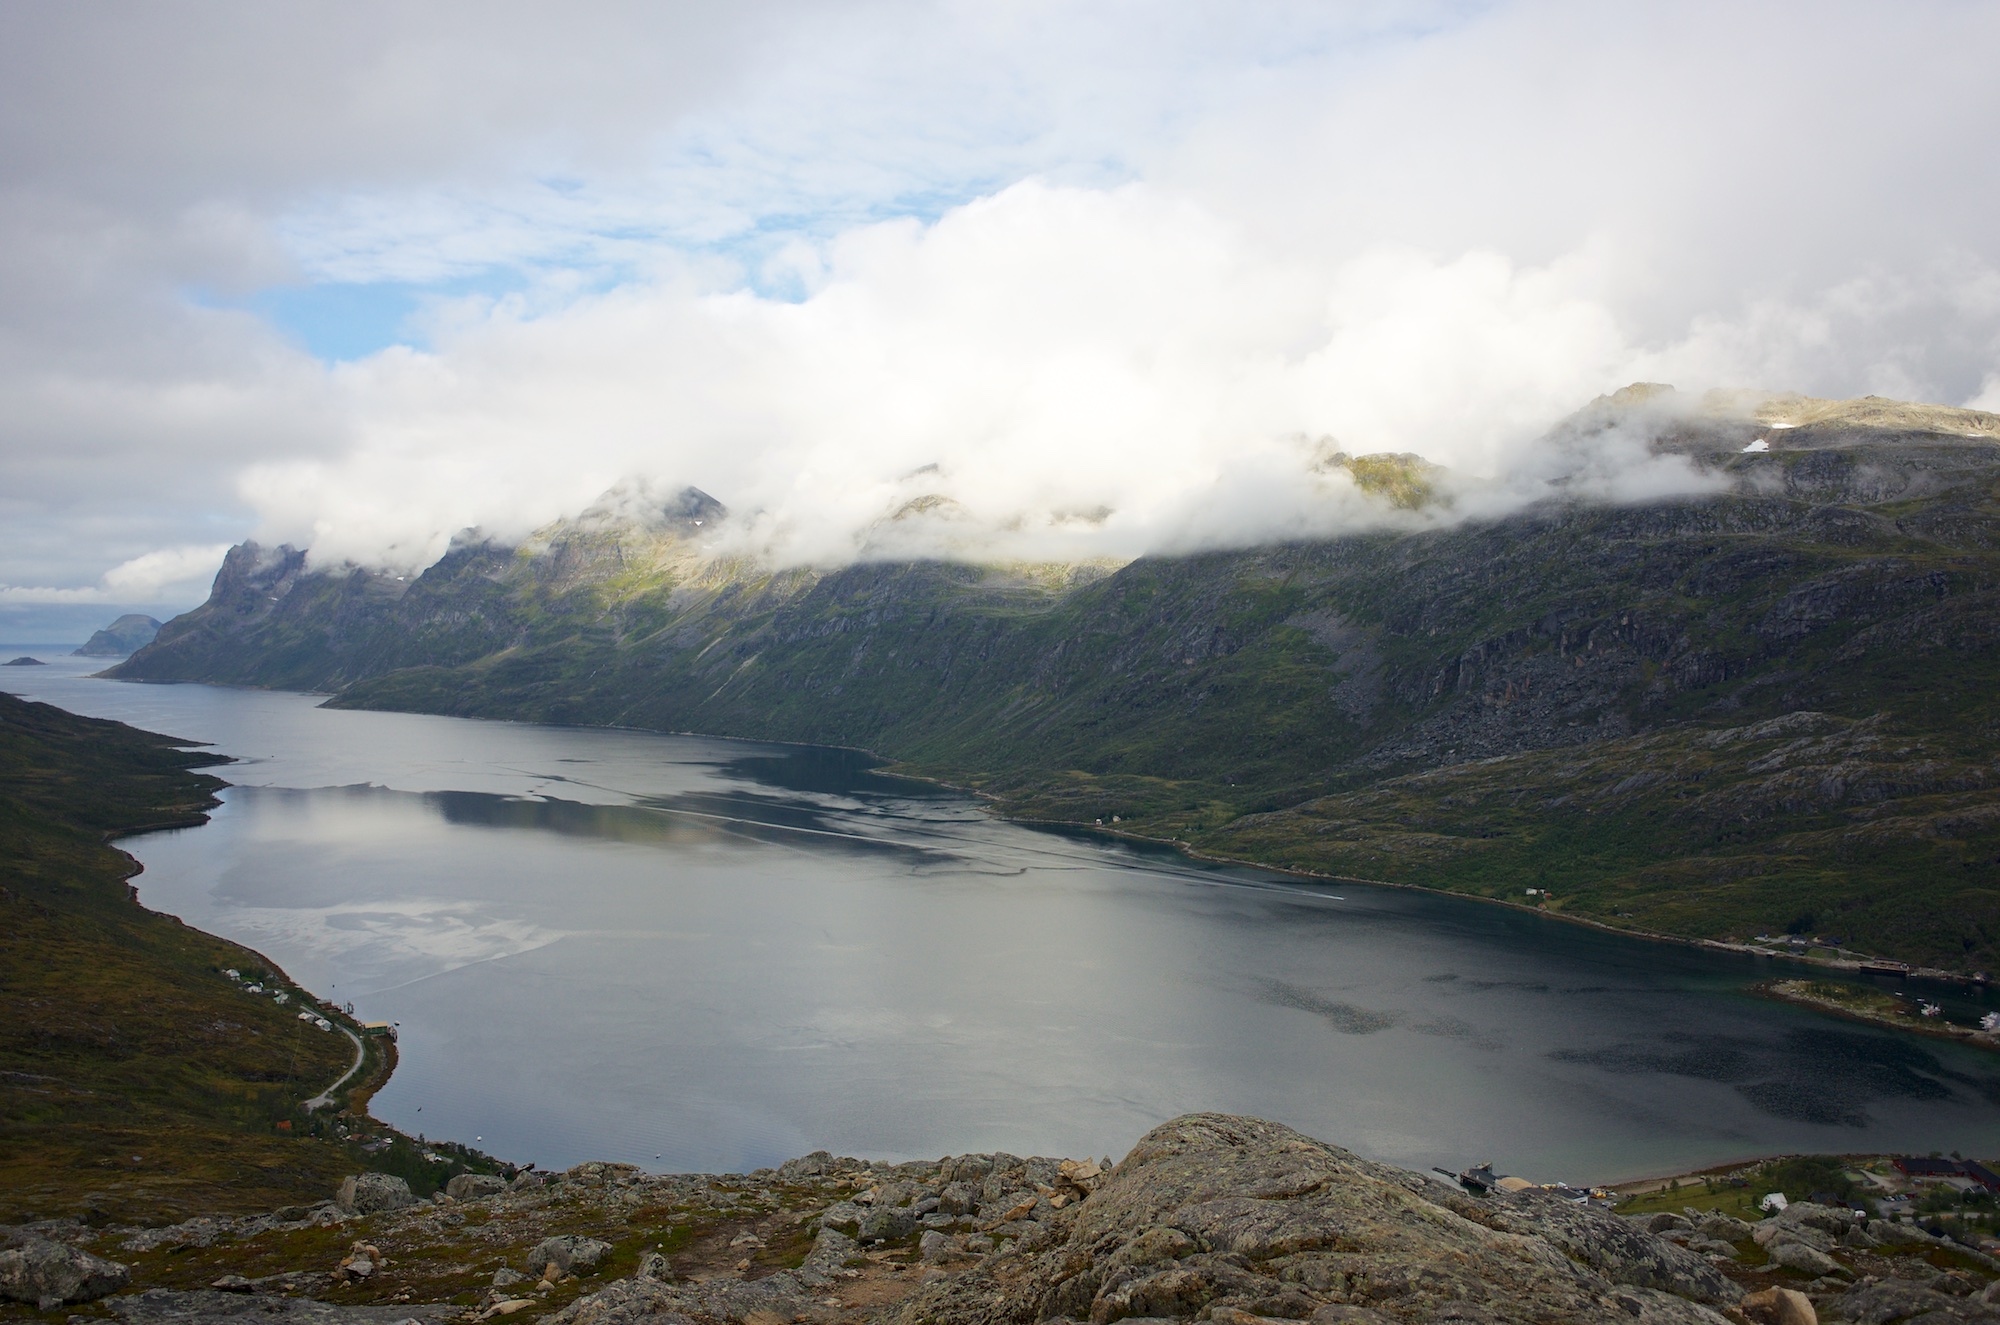 Summit view over Ersfjord. There was a lot of weather going on on the other side.